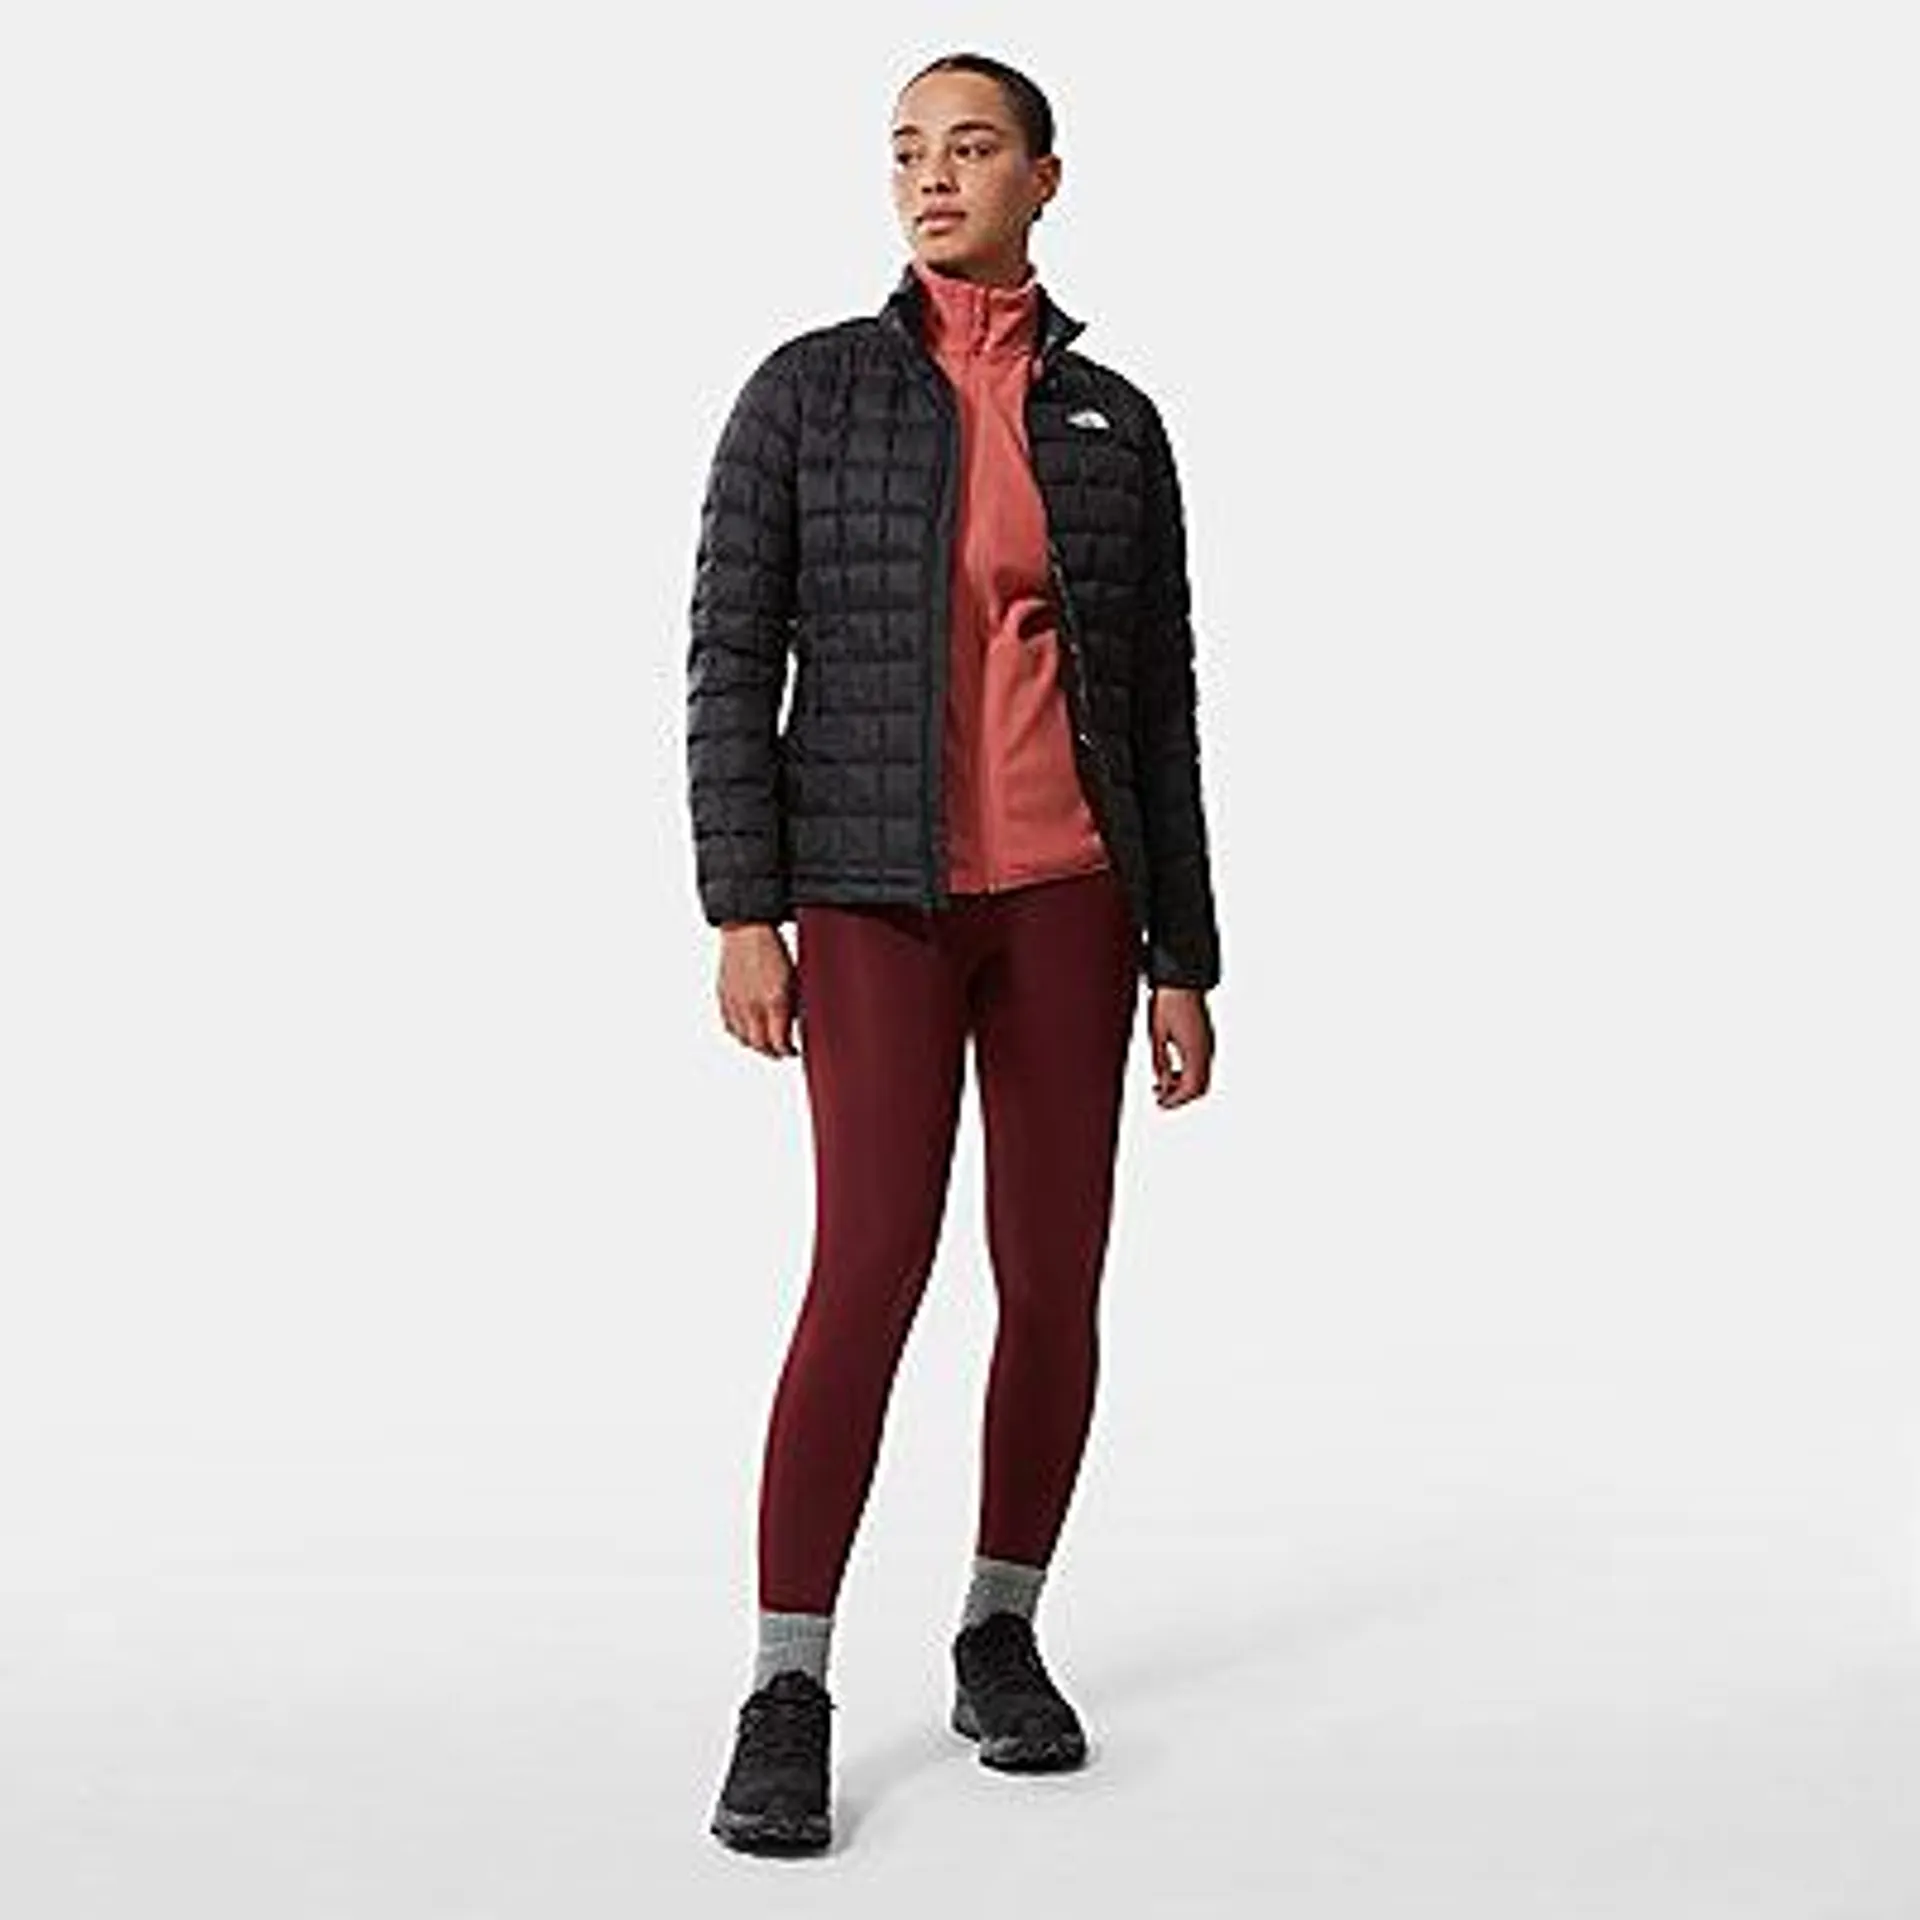 Women's Thermoball™ Eco Jacket 2.0